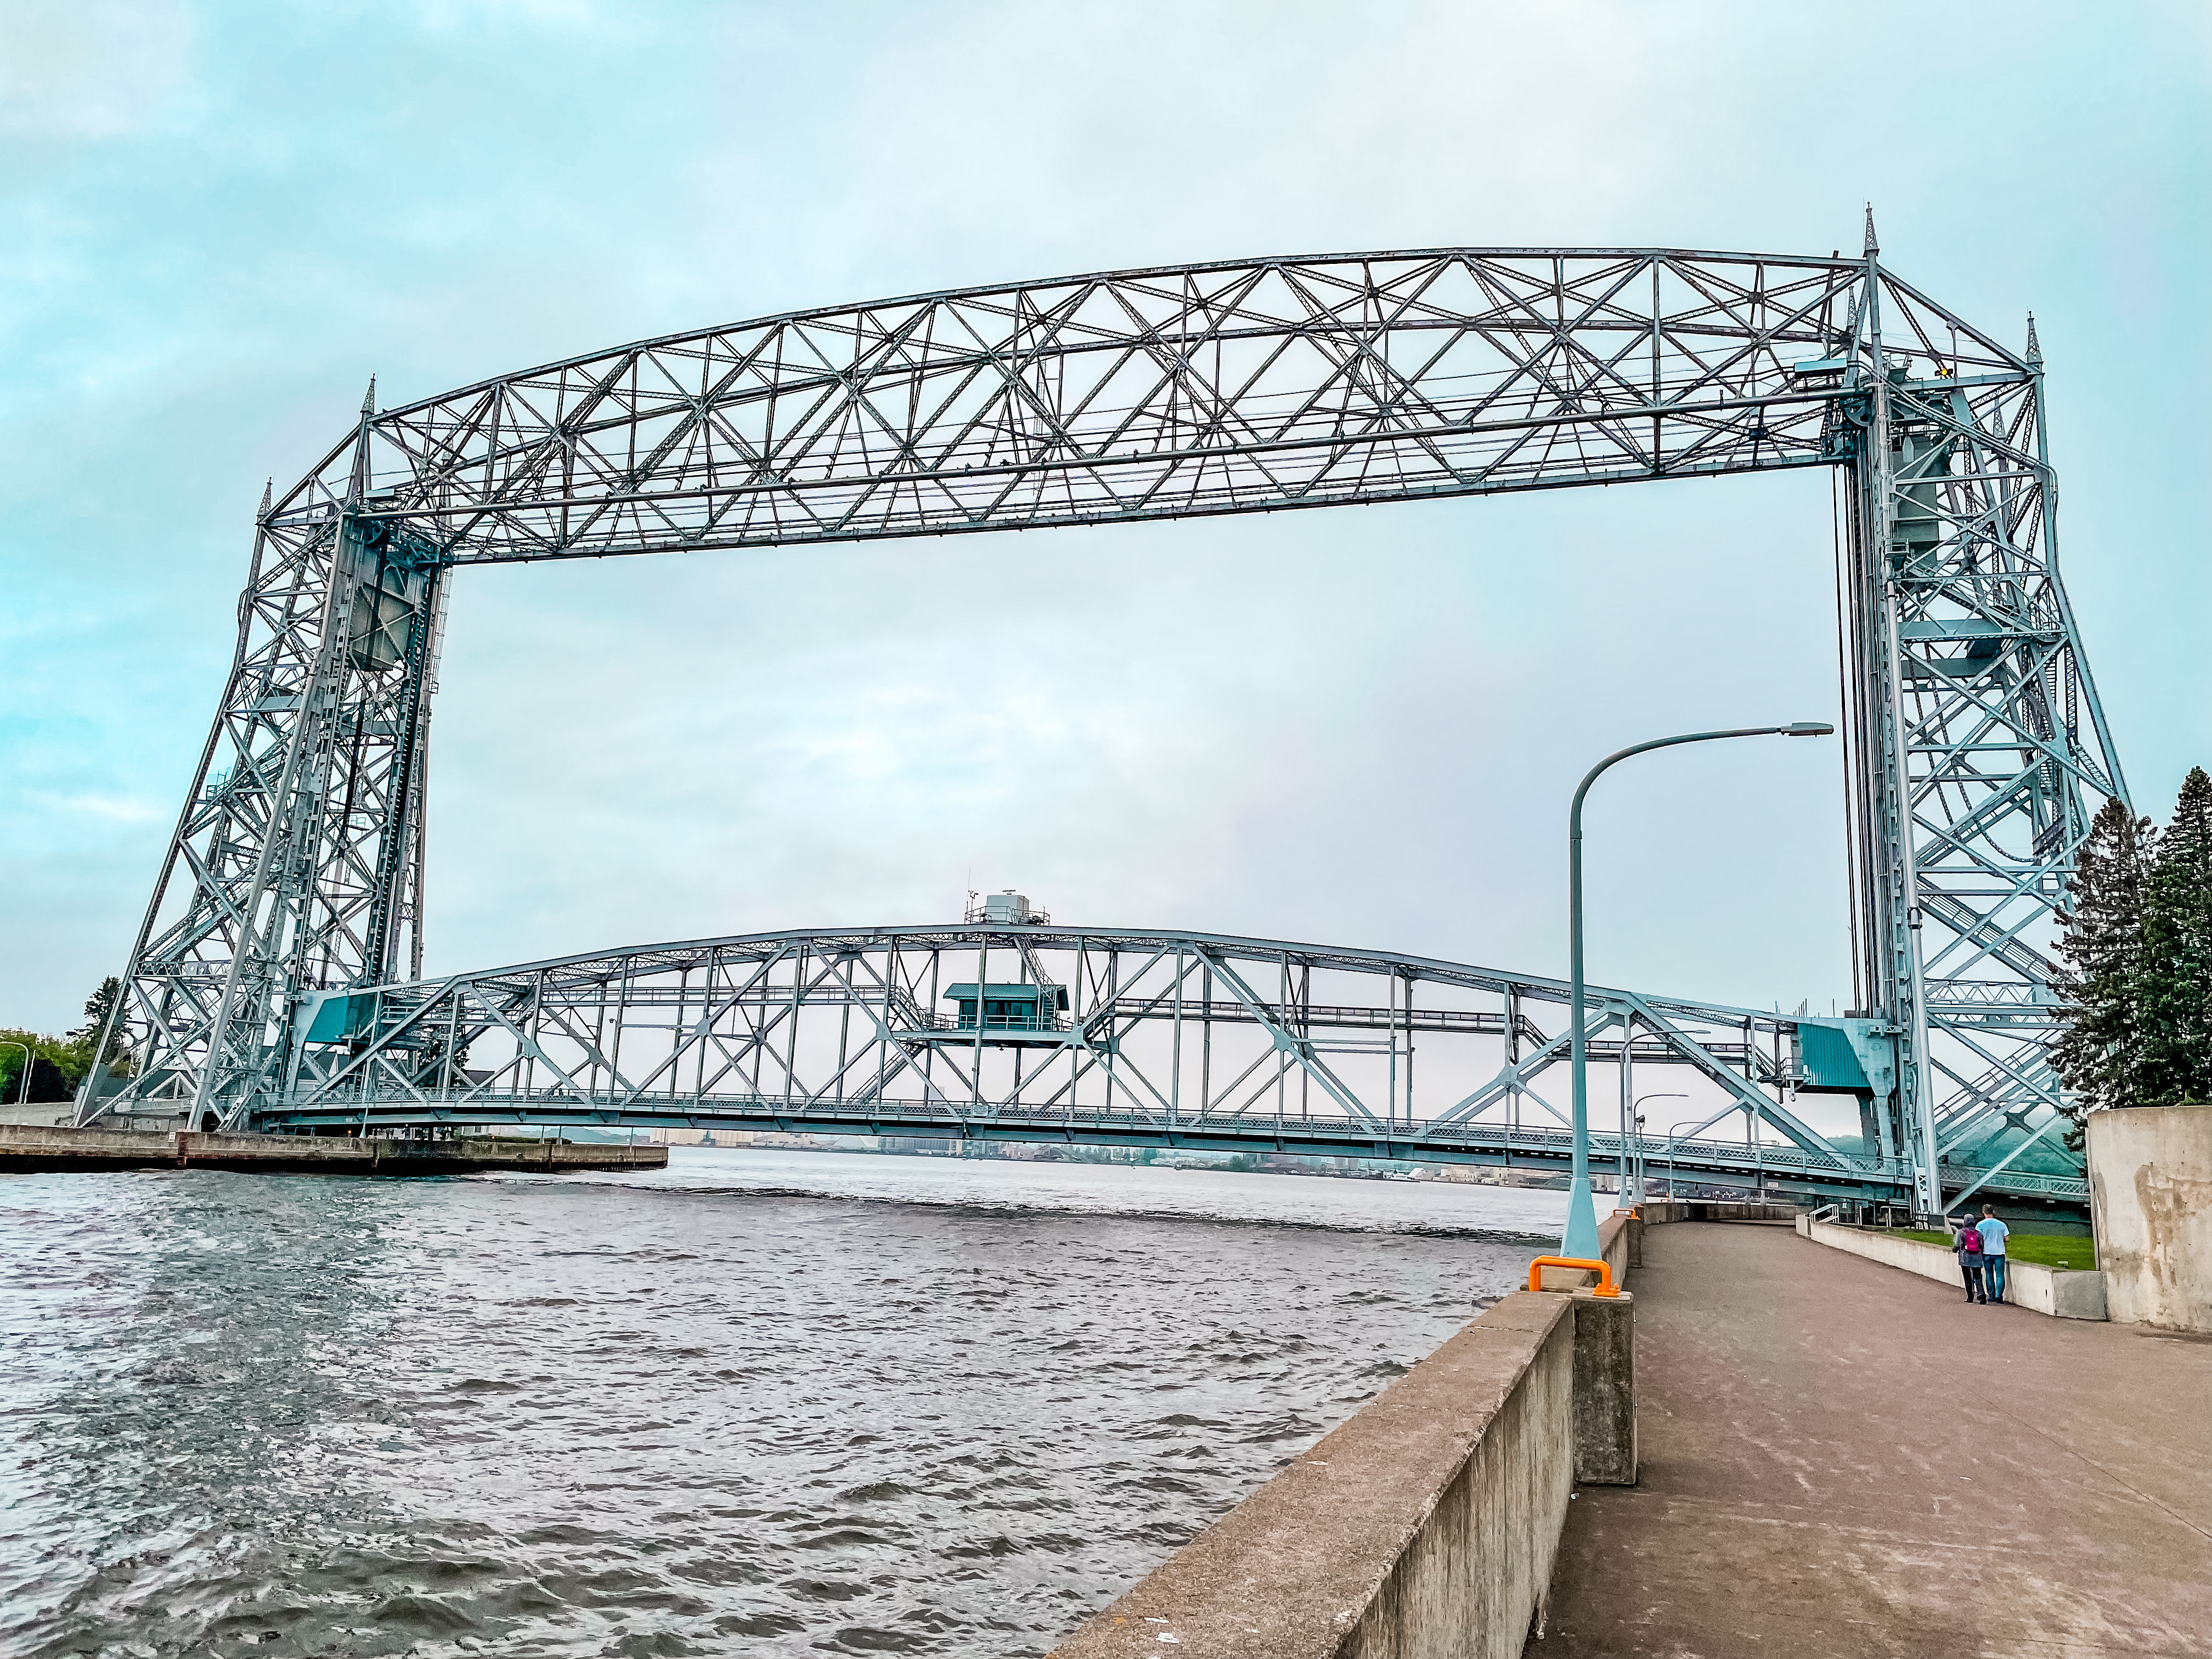 Aerial Lift Bridge over water with a bridge over it